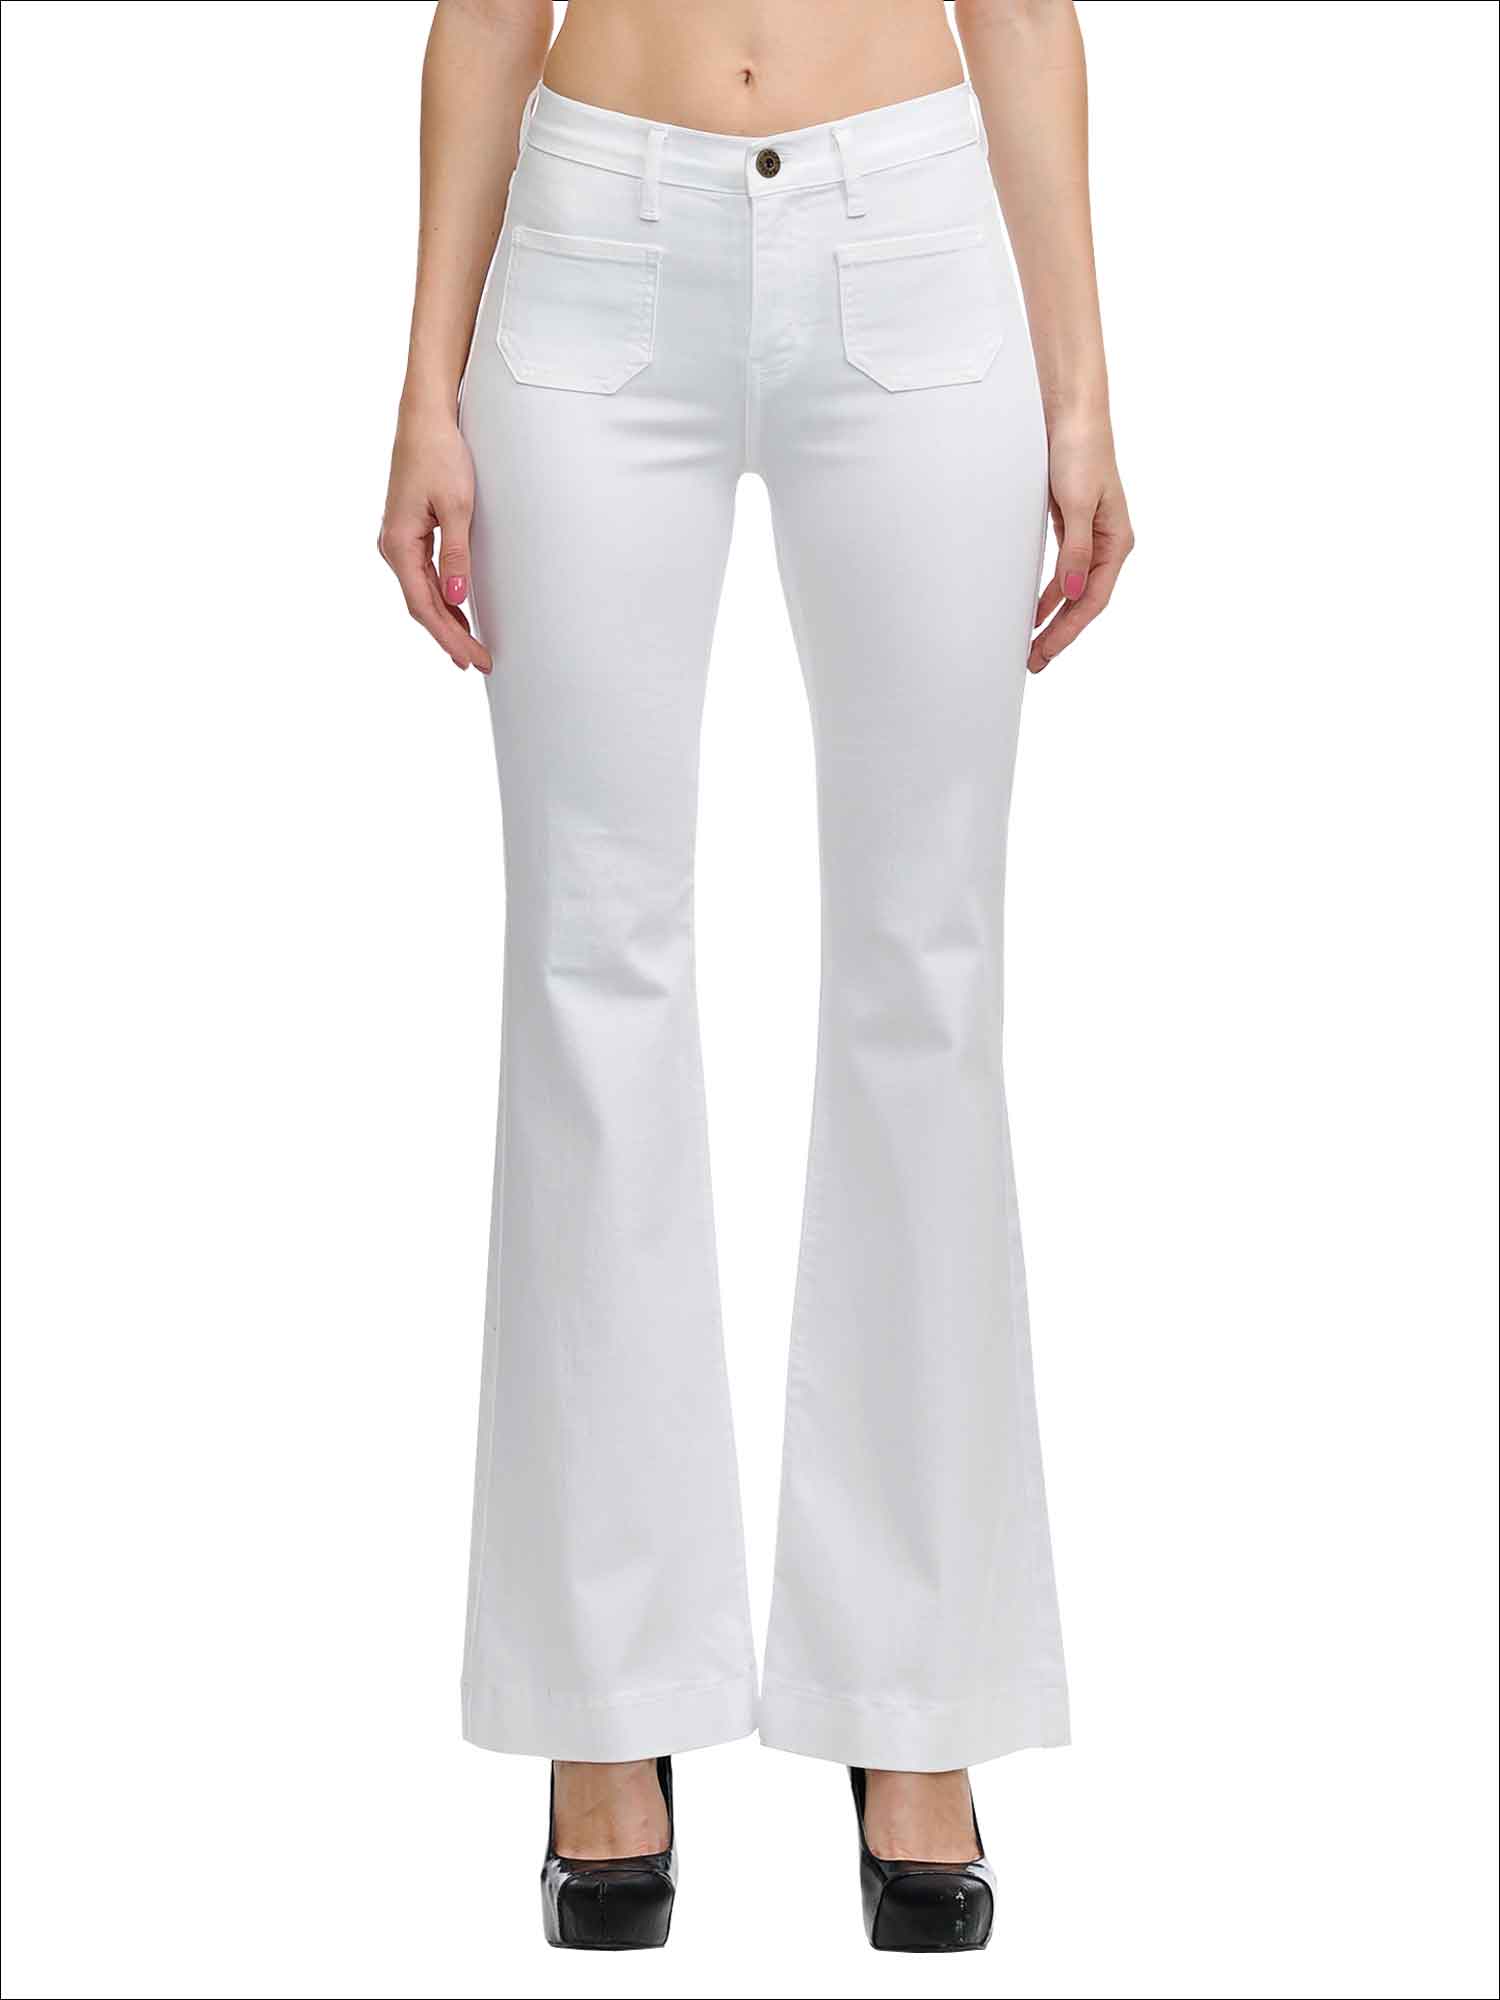 FUN PATCH POCKET FLARE JEANS